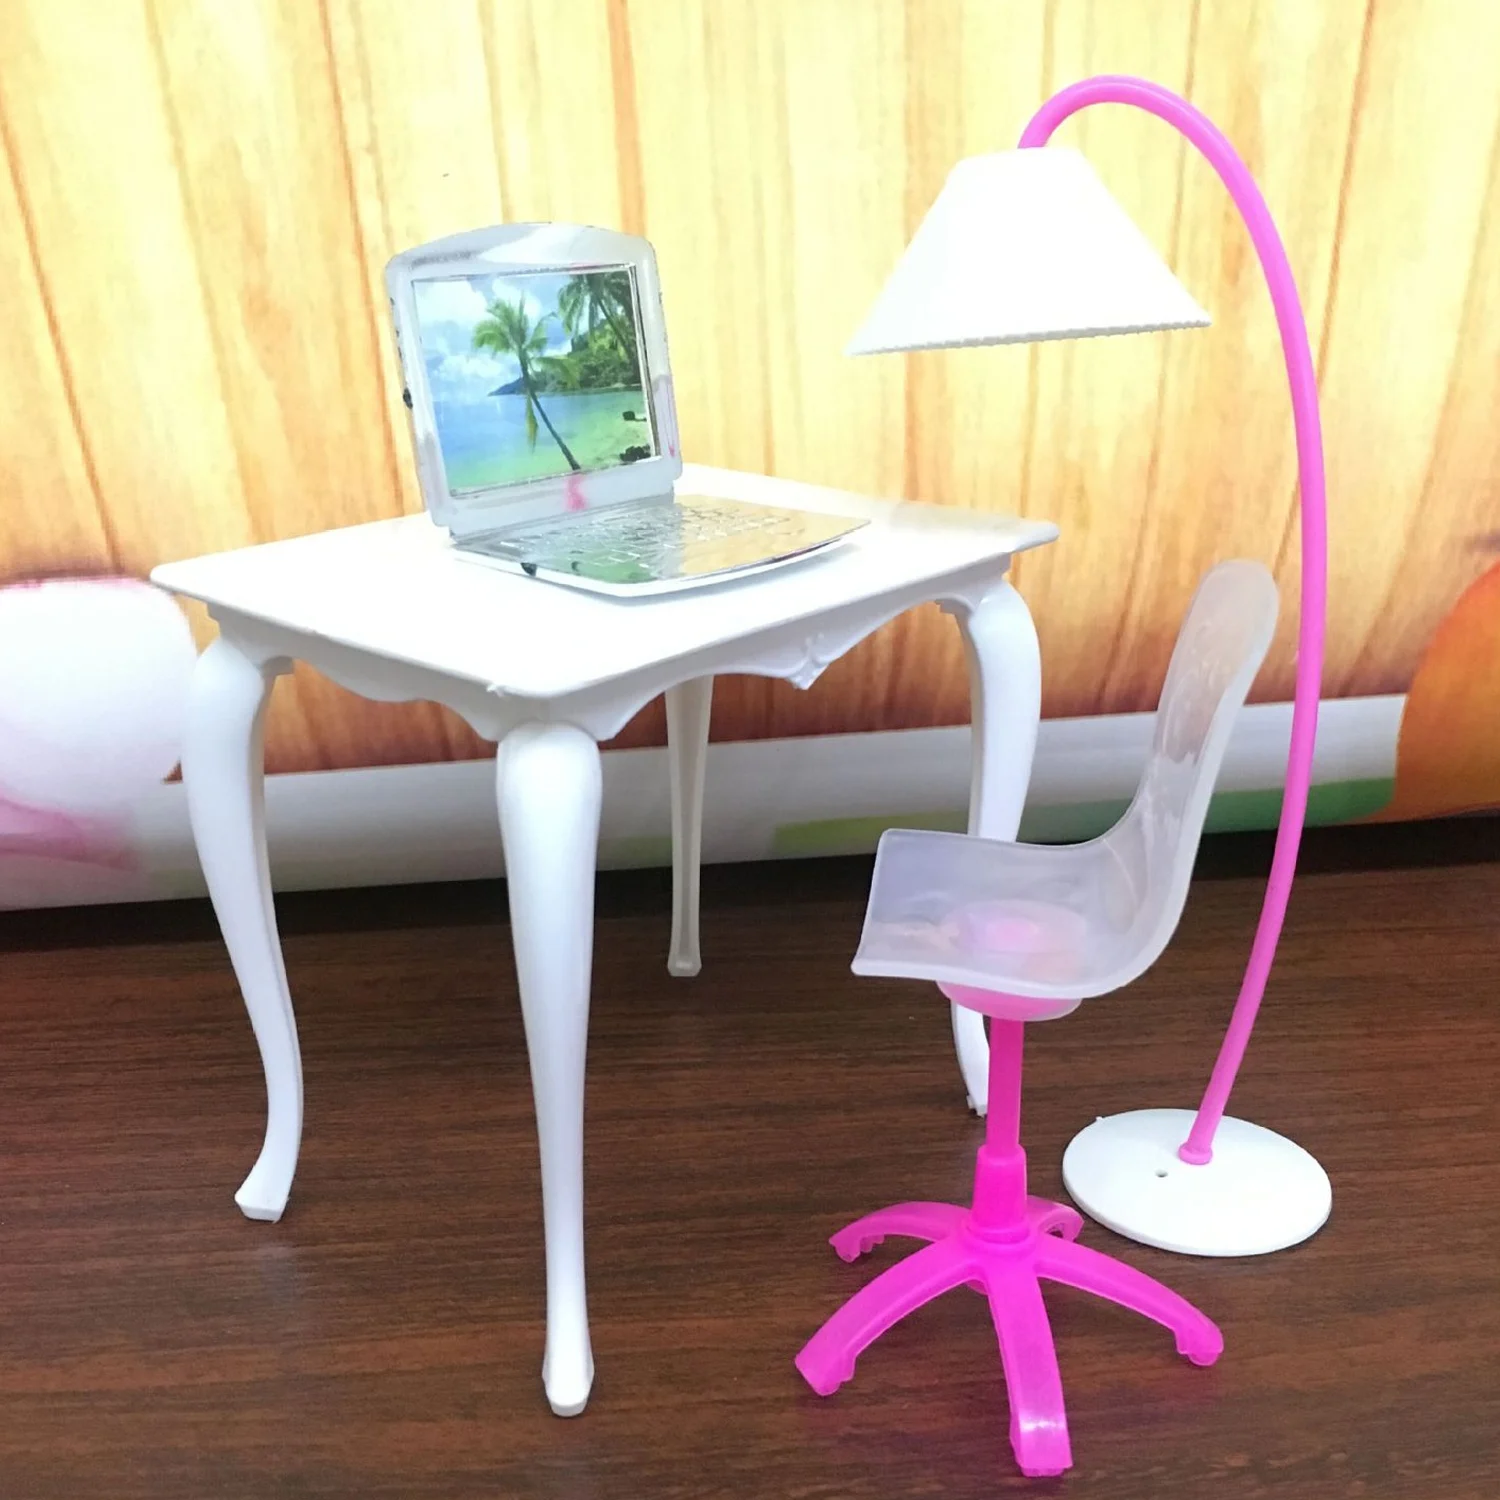 Details about   Mini Lounge Chair For Doll House Furniture Wooden Material Dollhouse Beach Chair 